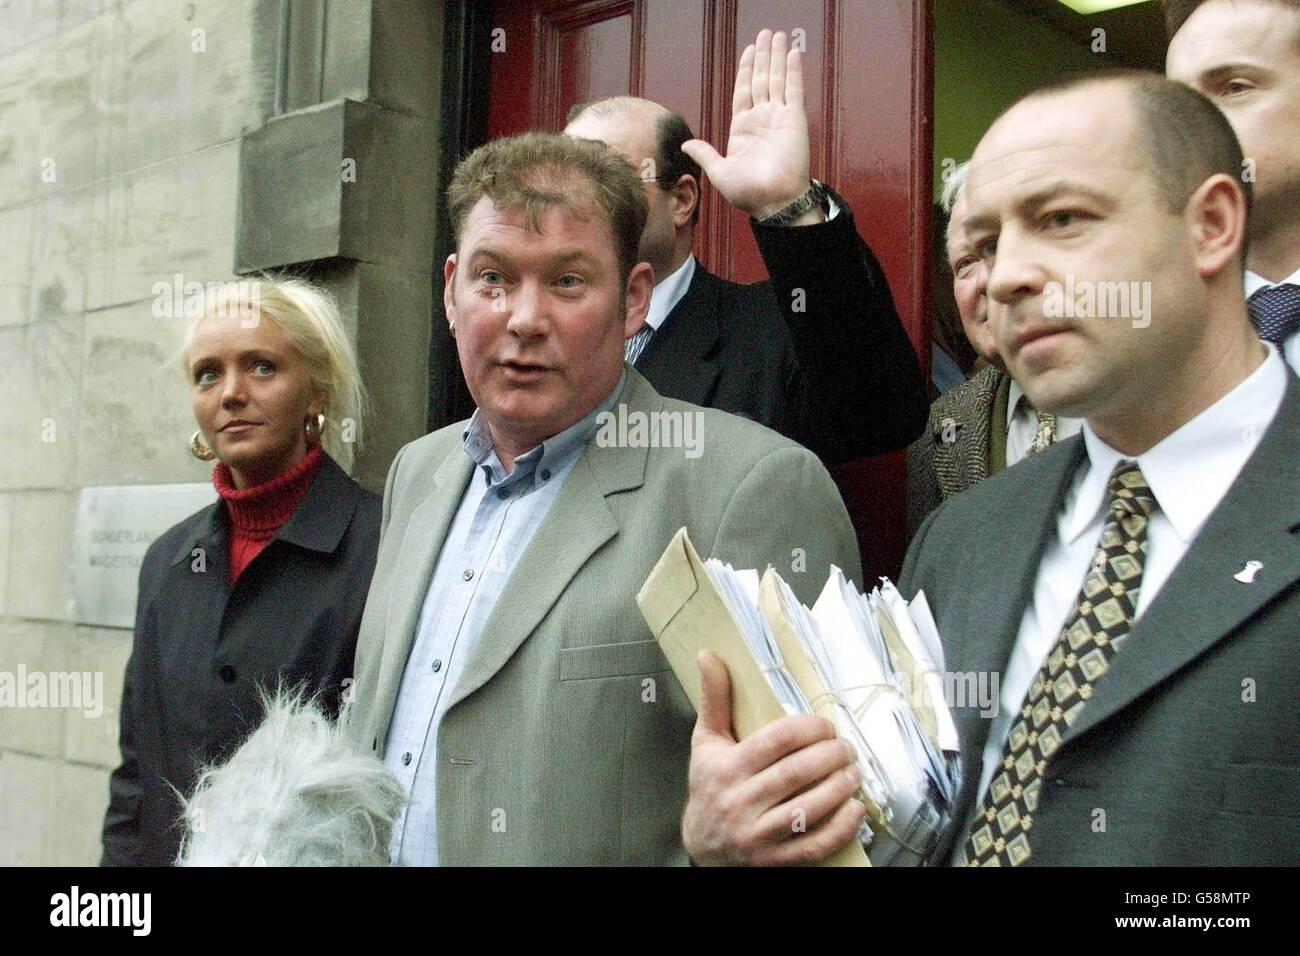 Pounds and ounces fruit and vegetable trader Steven Thoburn (C) talks to the press with his wife Leigh (L) and campaigner Neil Herron, outside Sunderland Magistrates' Court. He was told that he must wait until April 2001 before learning his fate. * The father-of-two is being prosecuted by Sunderland City Council for using imperial measures only scales, instead of metric weights, at his market stall in Sunderland. His stall was raided by trading standards officers in July last year and his scales were seized. On the third day of the hearing District Judge John Morgan told Mr Thoburn that it Stock Photo